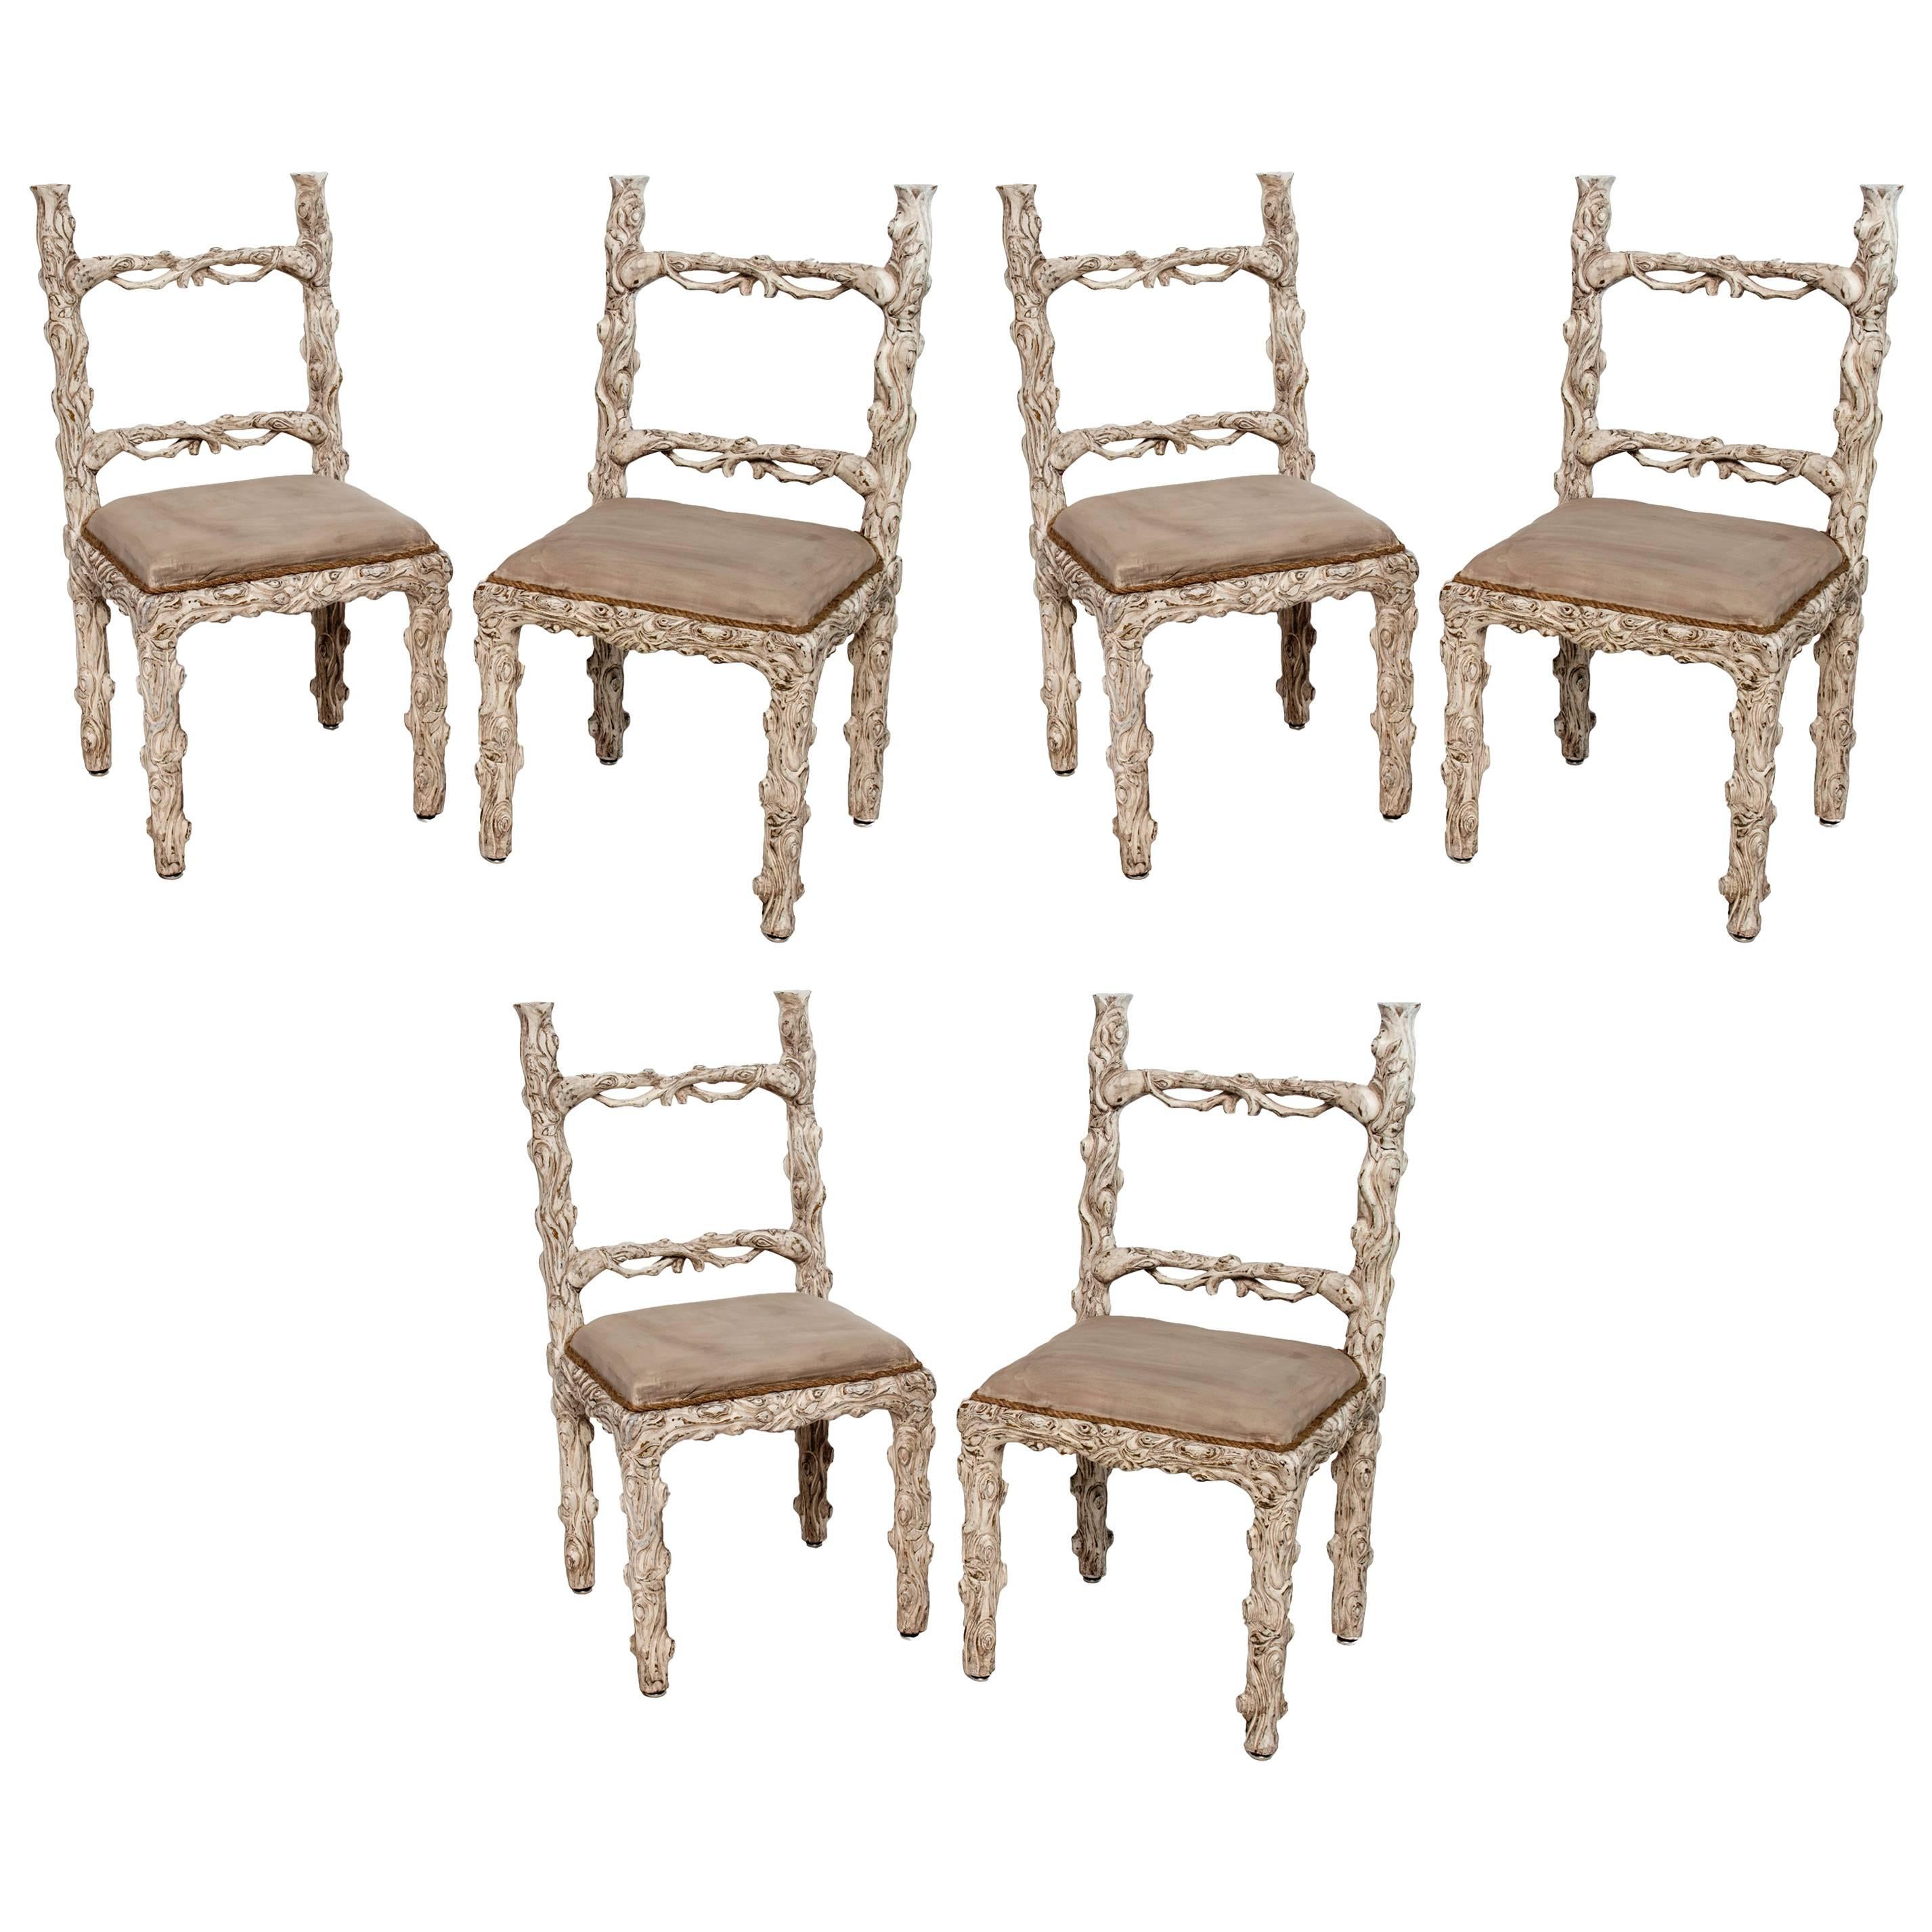 Set of Six Carved White Painted Wooden Chairs with a Faux Tree Trunk Design